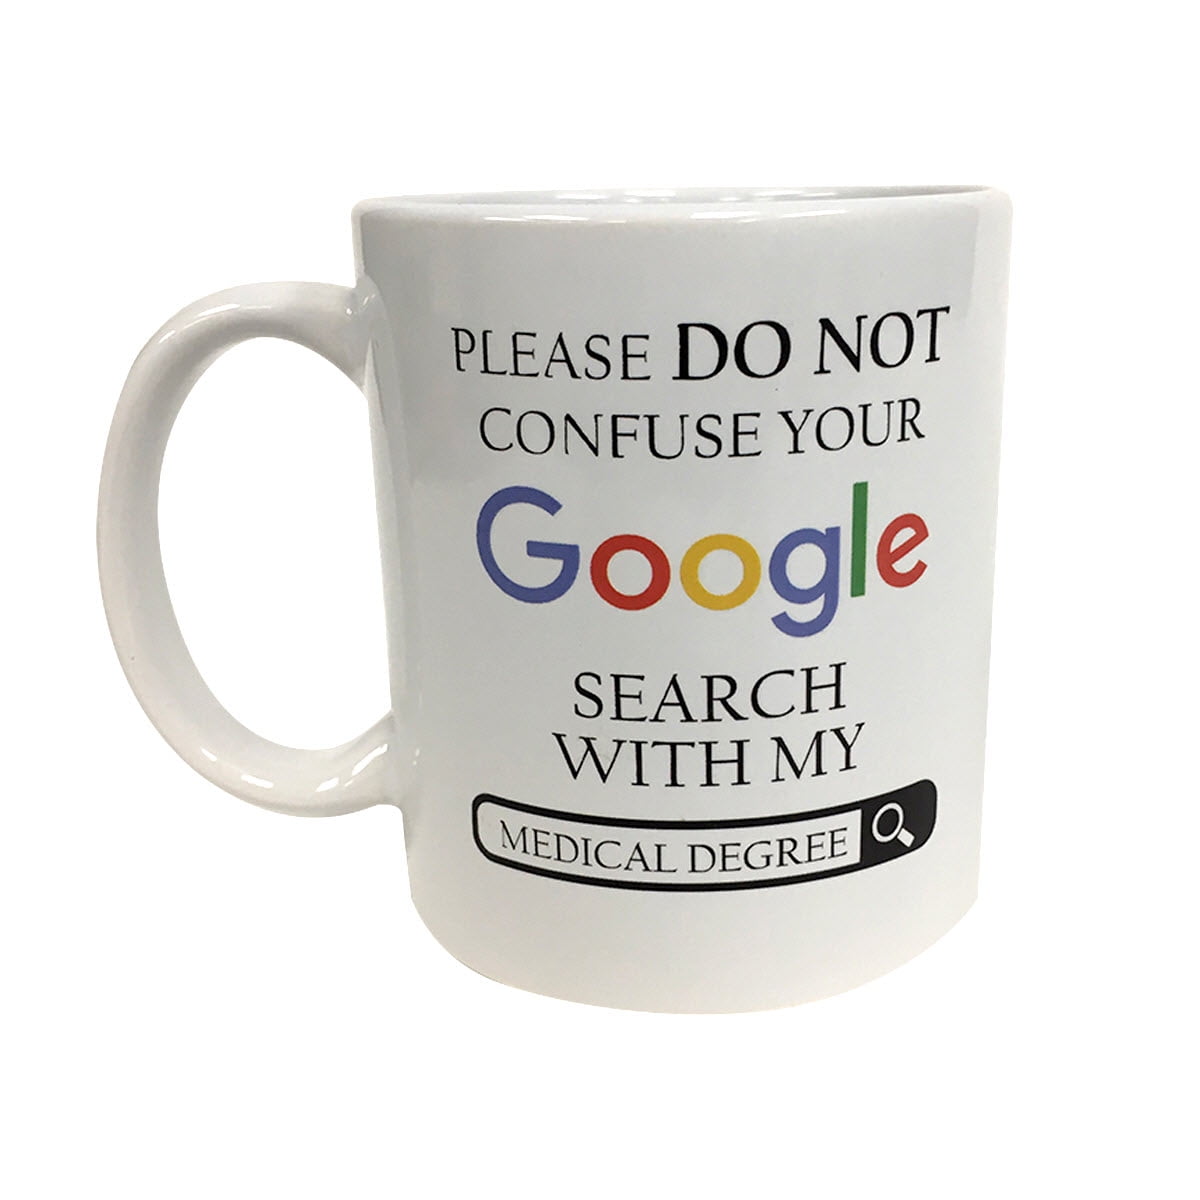 Please Do Not Confuse Your Google Search With My Dental Degree Coffee mug 